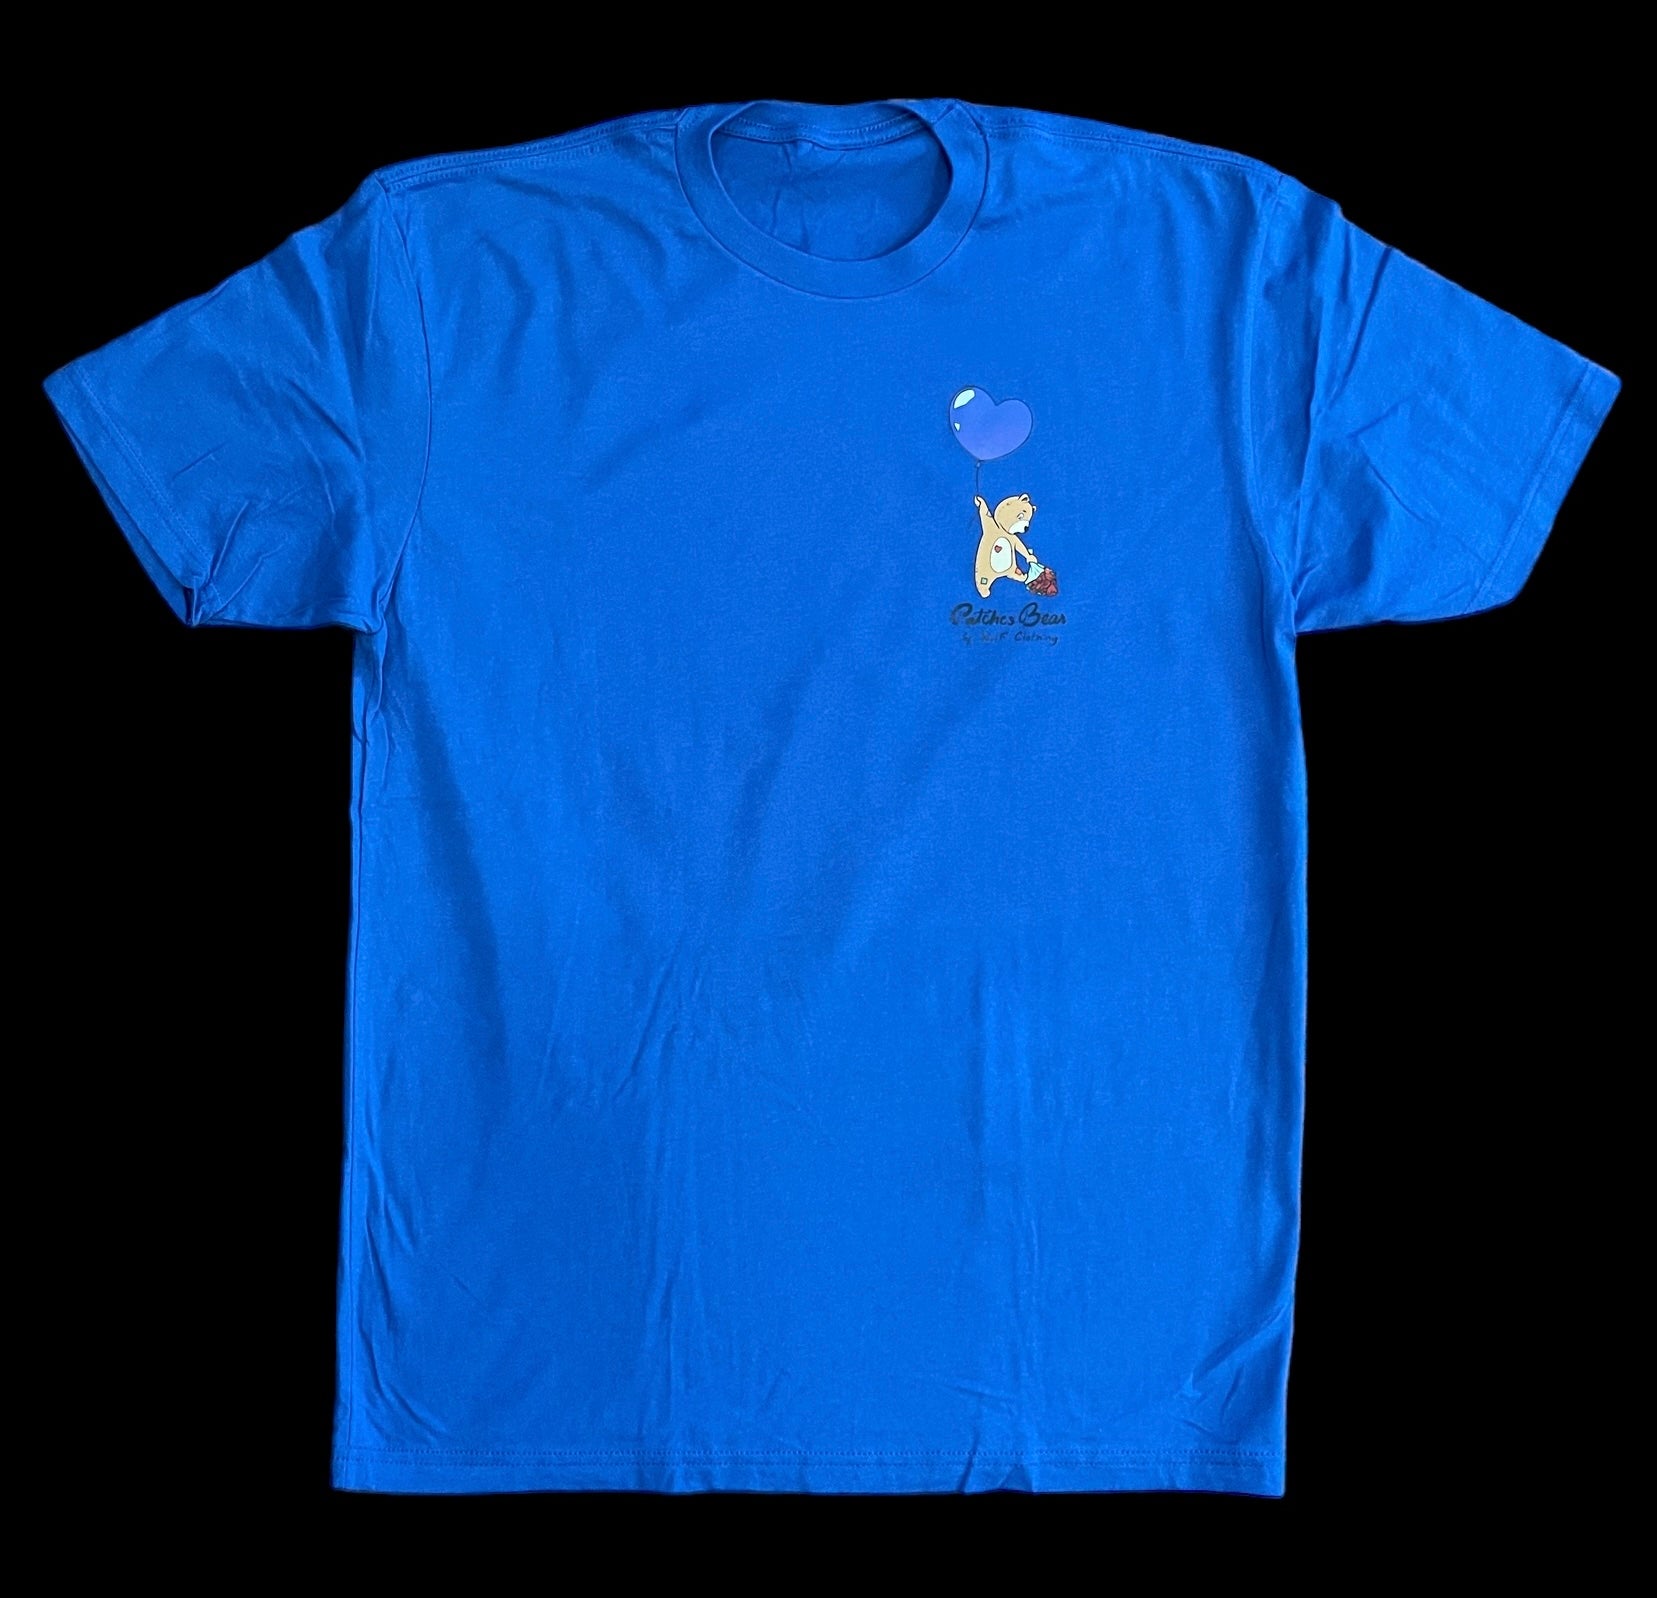 SLIF x PATCHES pocket tee (royal blue)